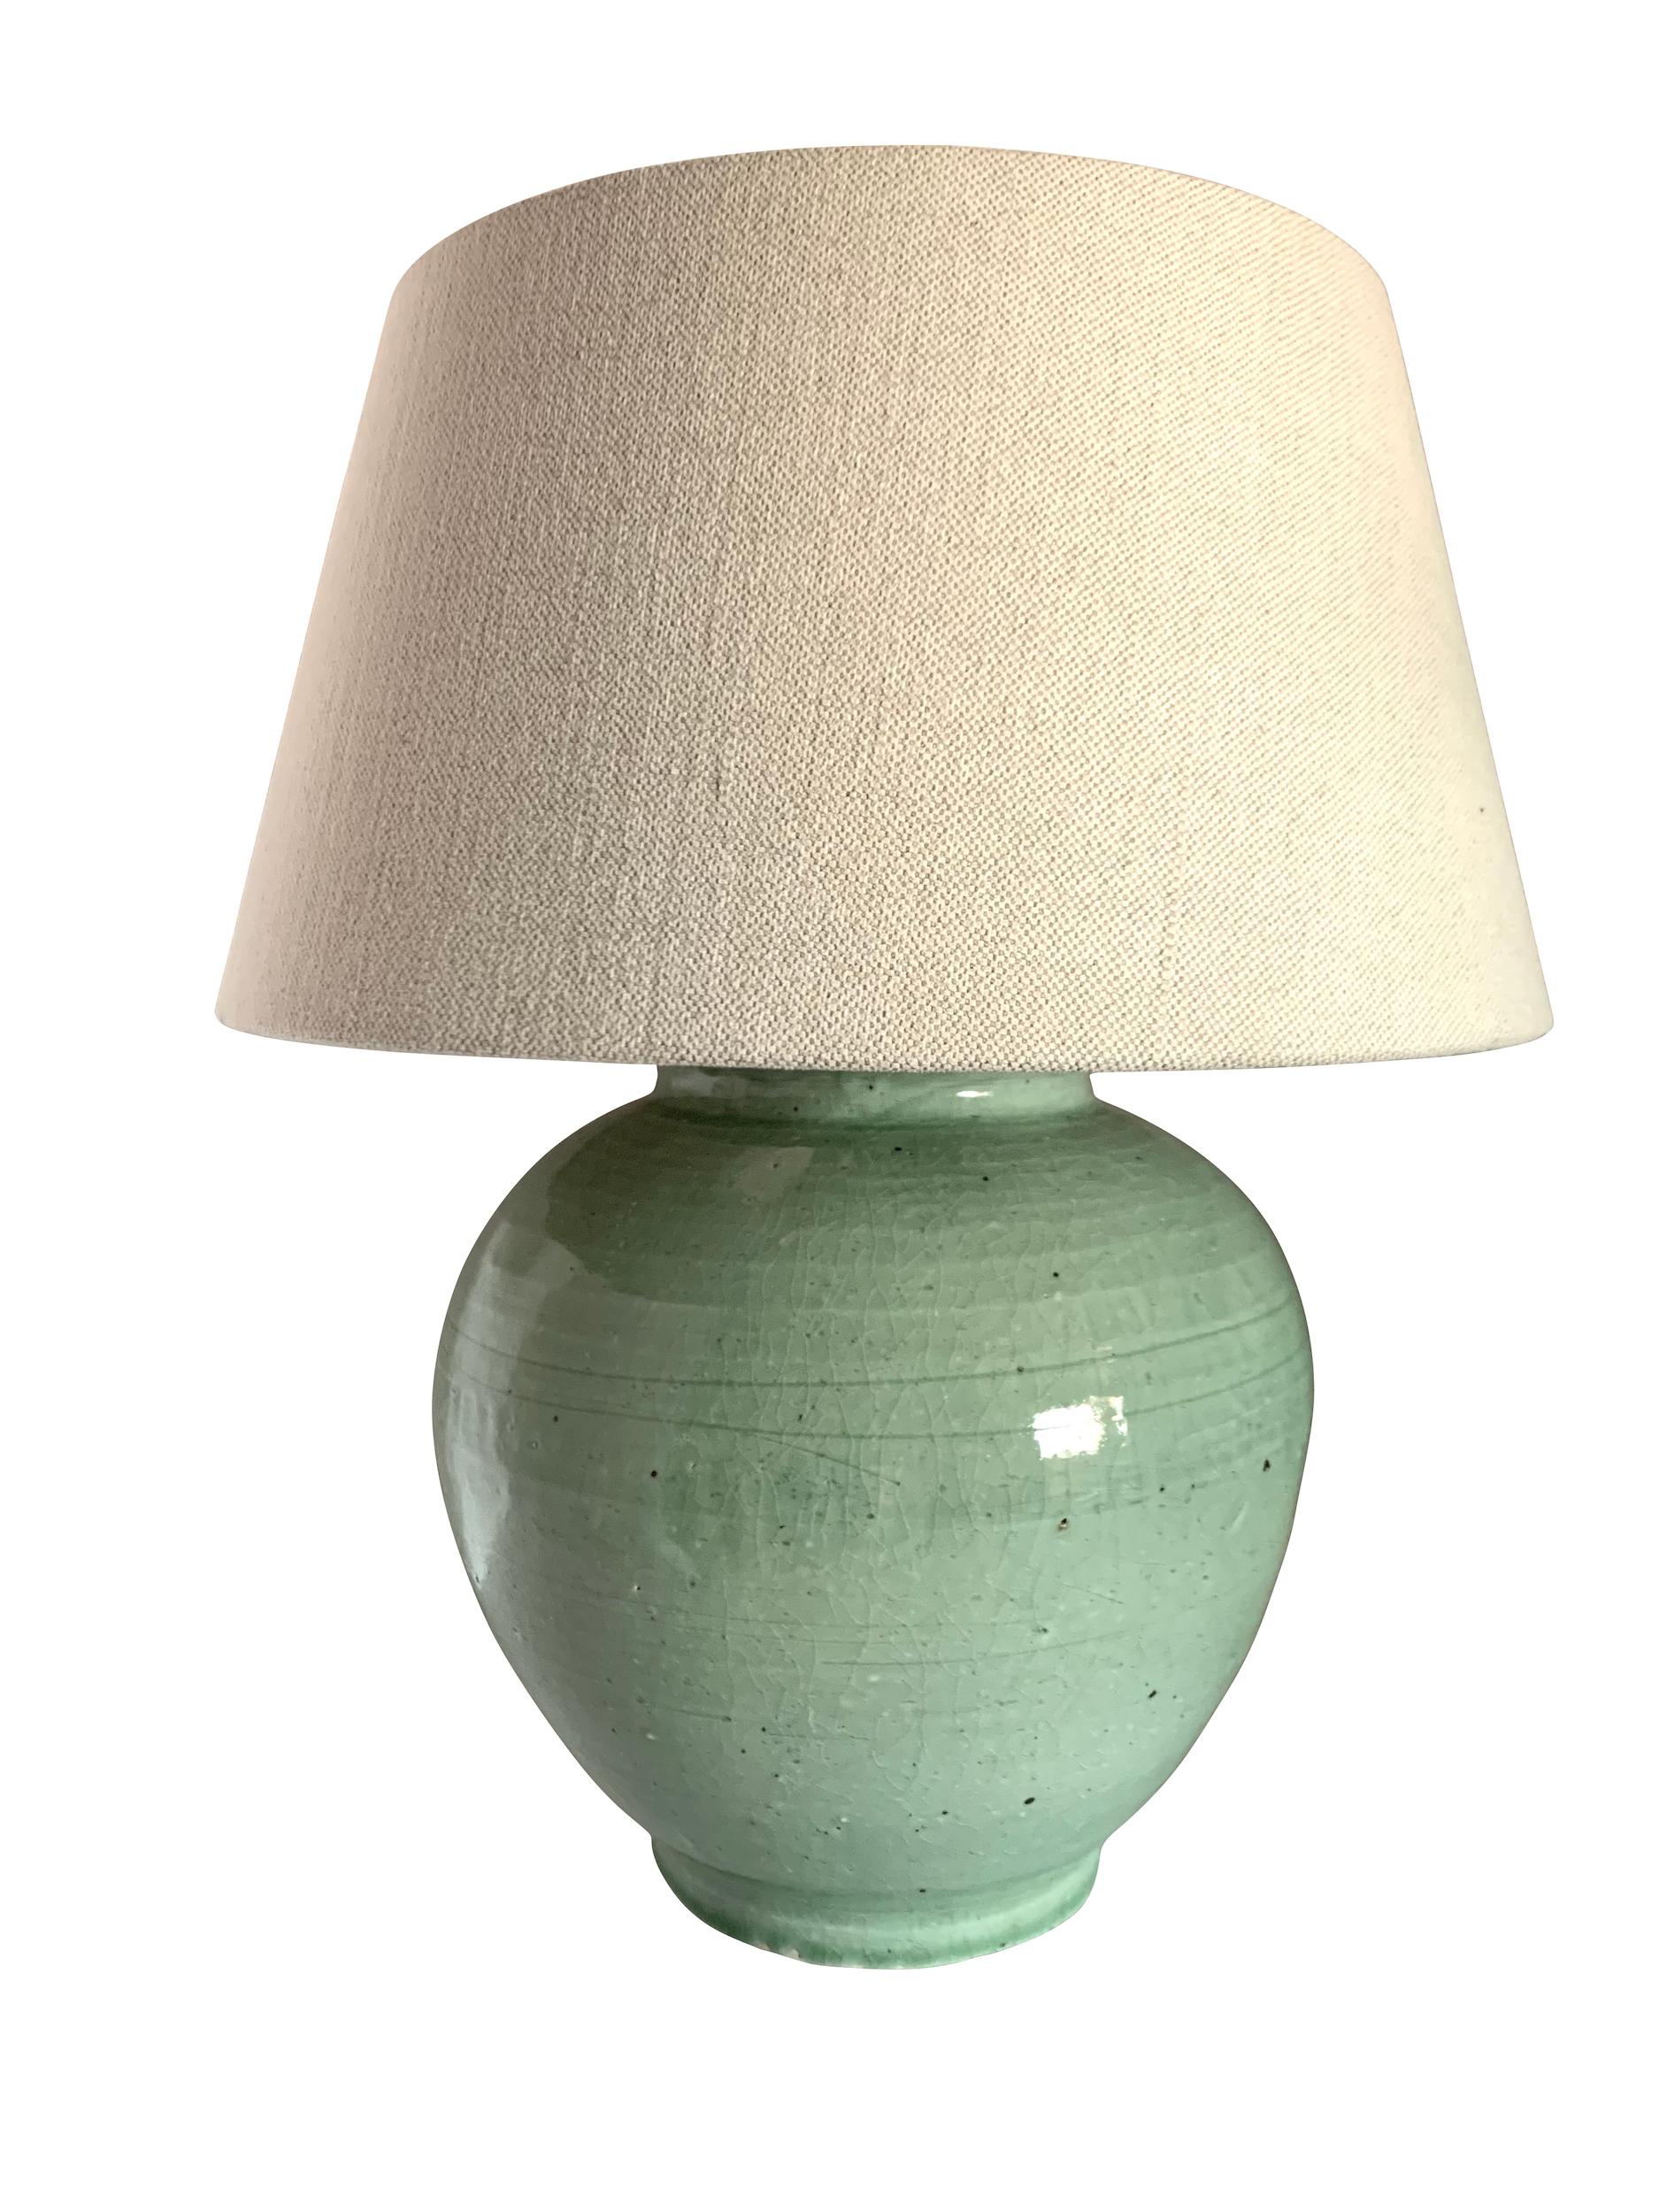 Contemporary Chinese pair celadon colored glazed lamps.
Classic ginger jar shape.
Base measures 10